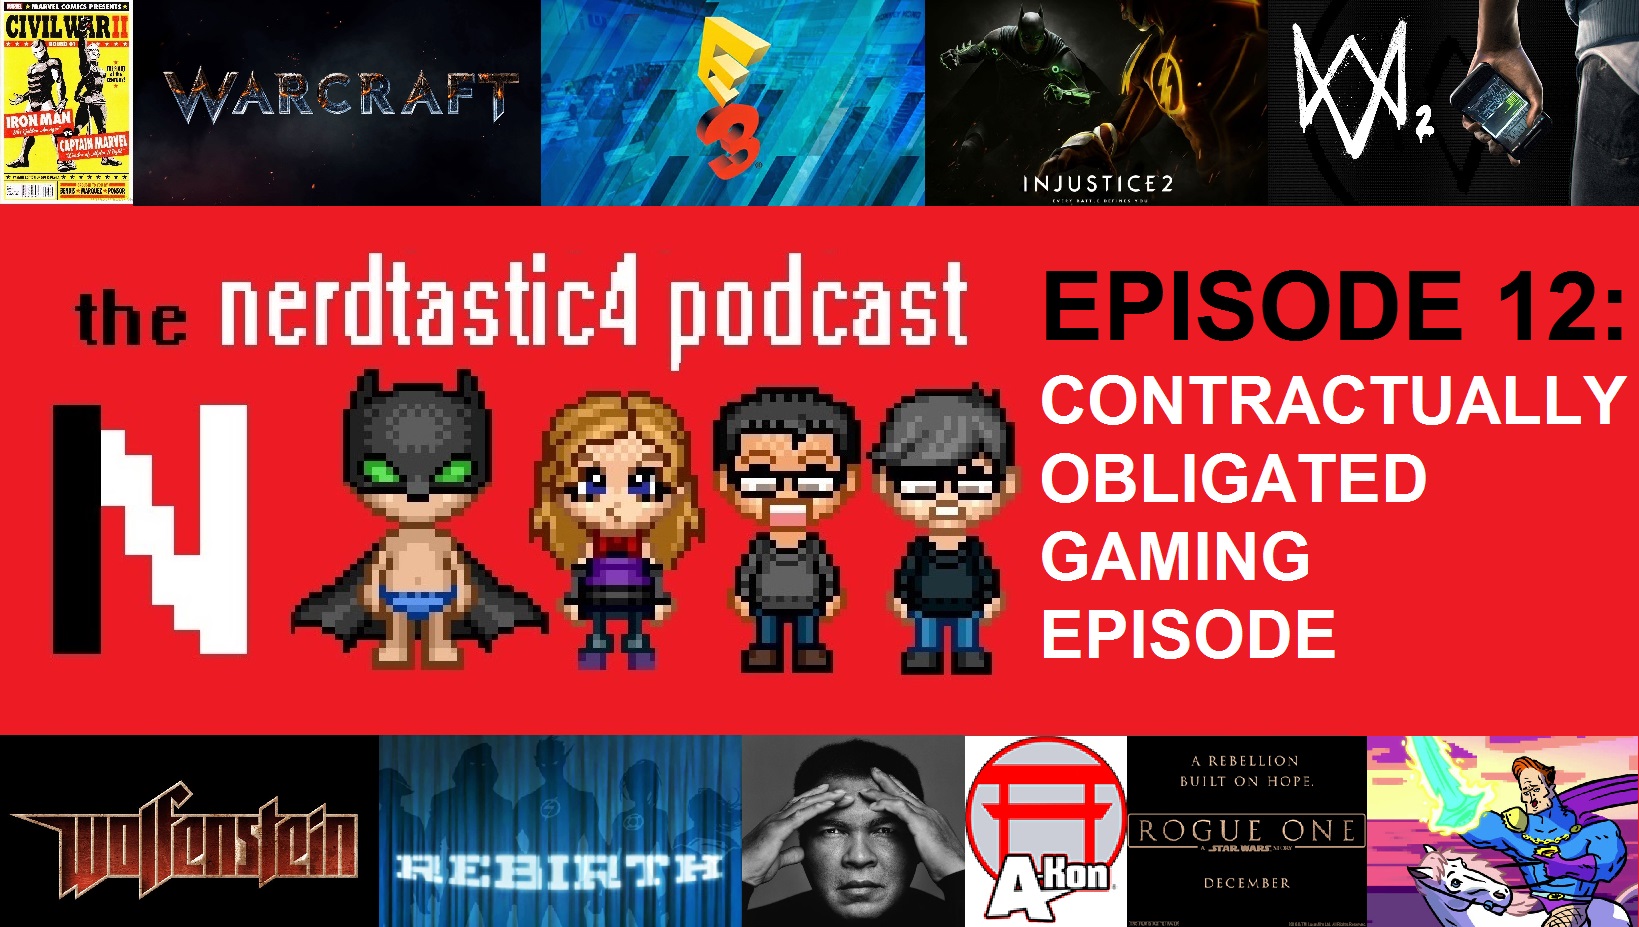 Episode 12: Contractually Obligated Gaming Episode